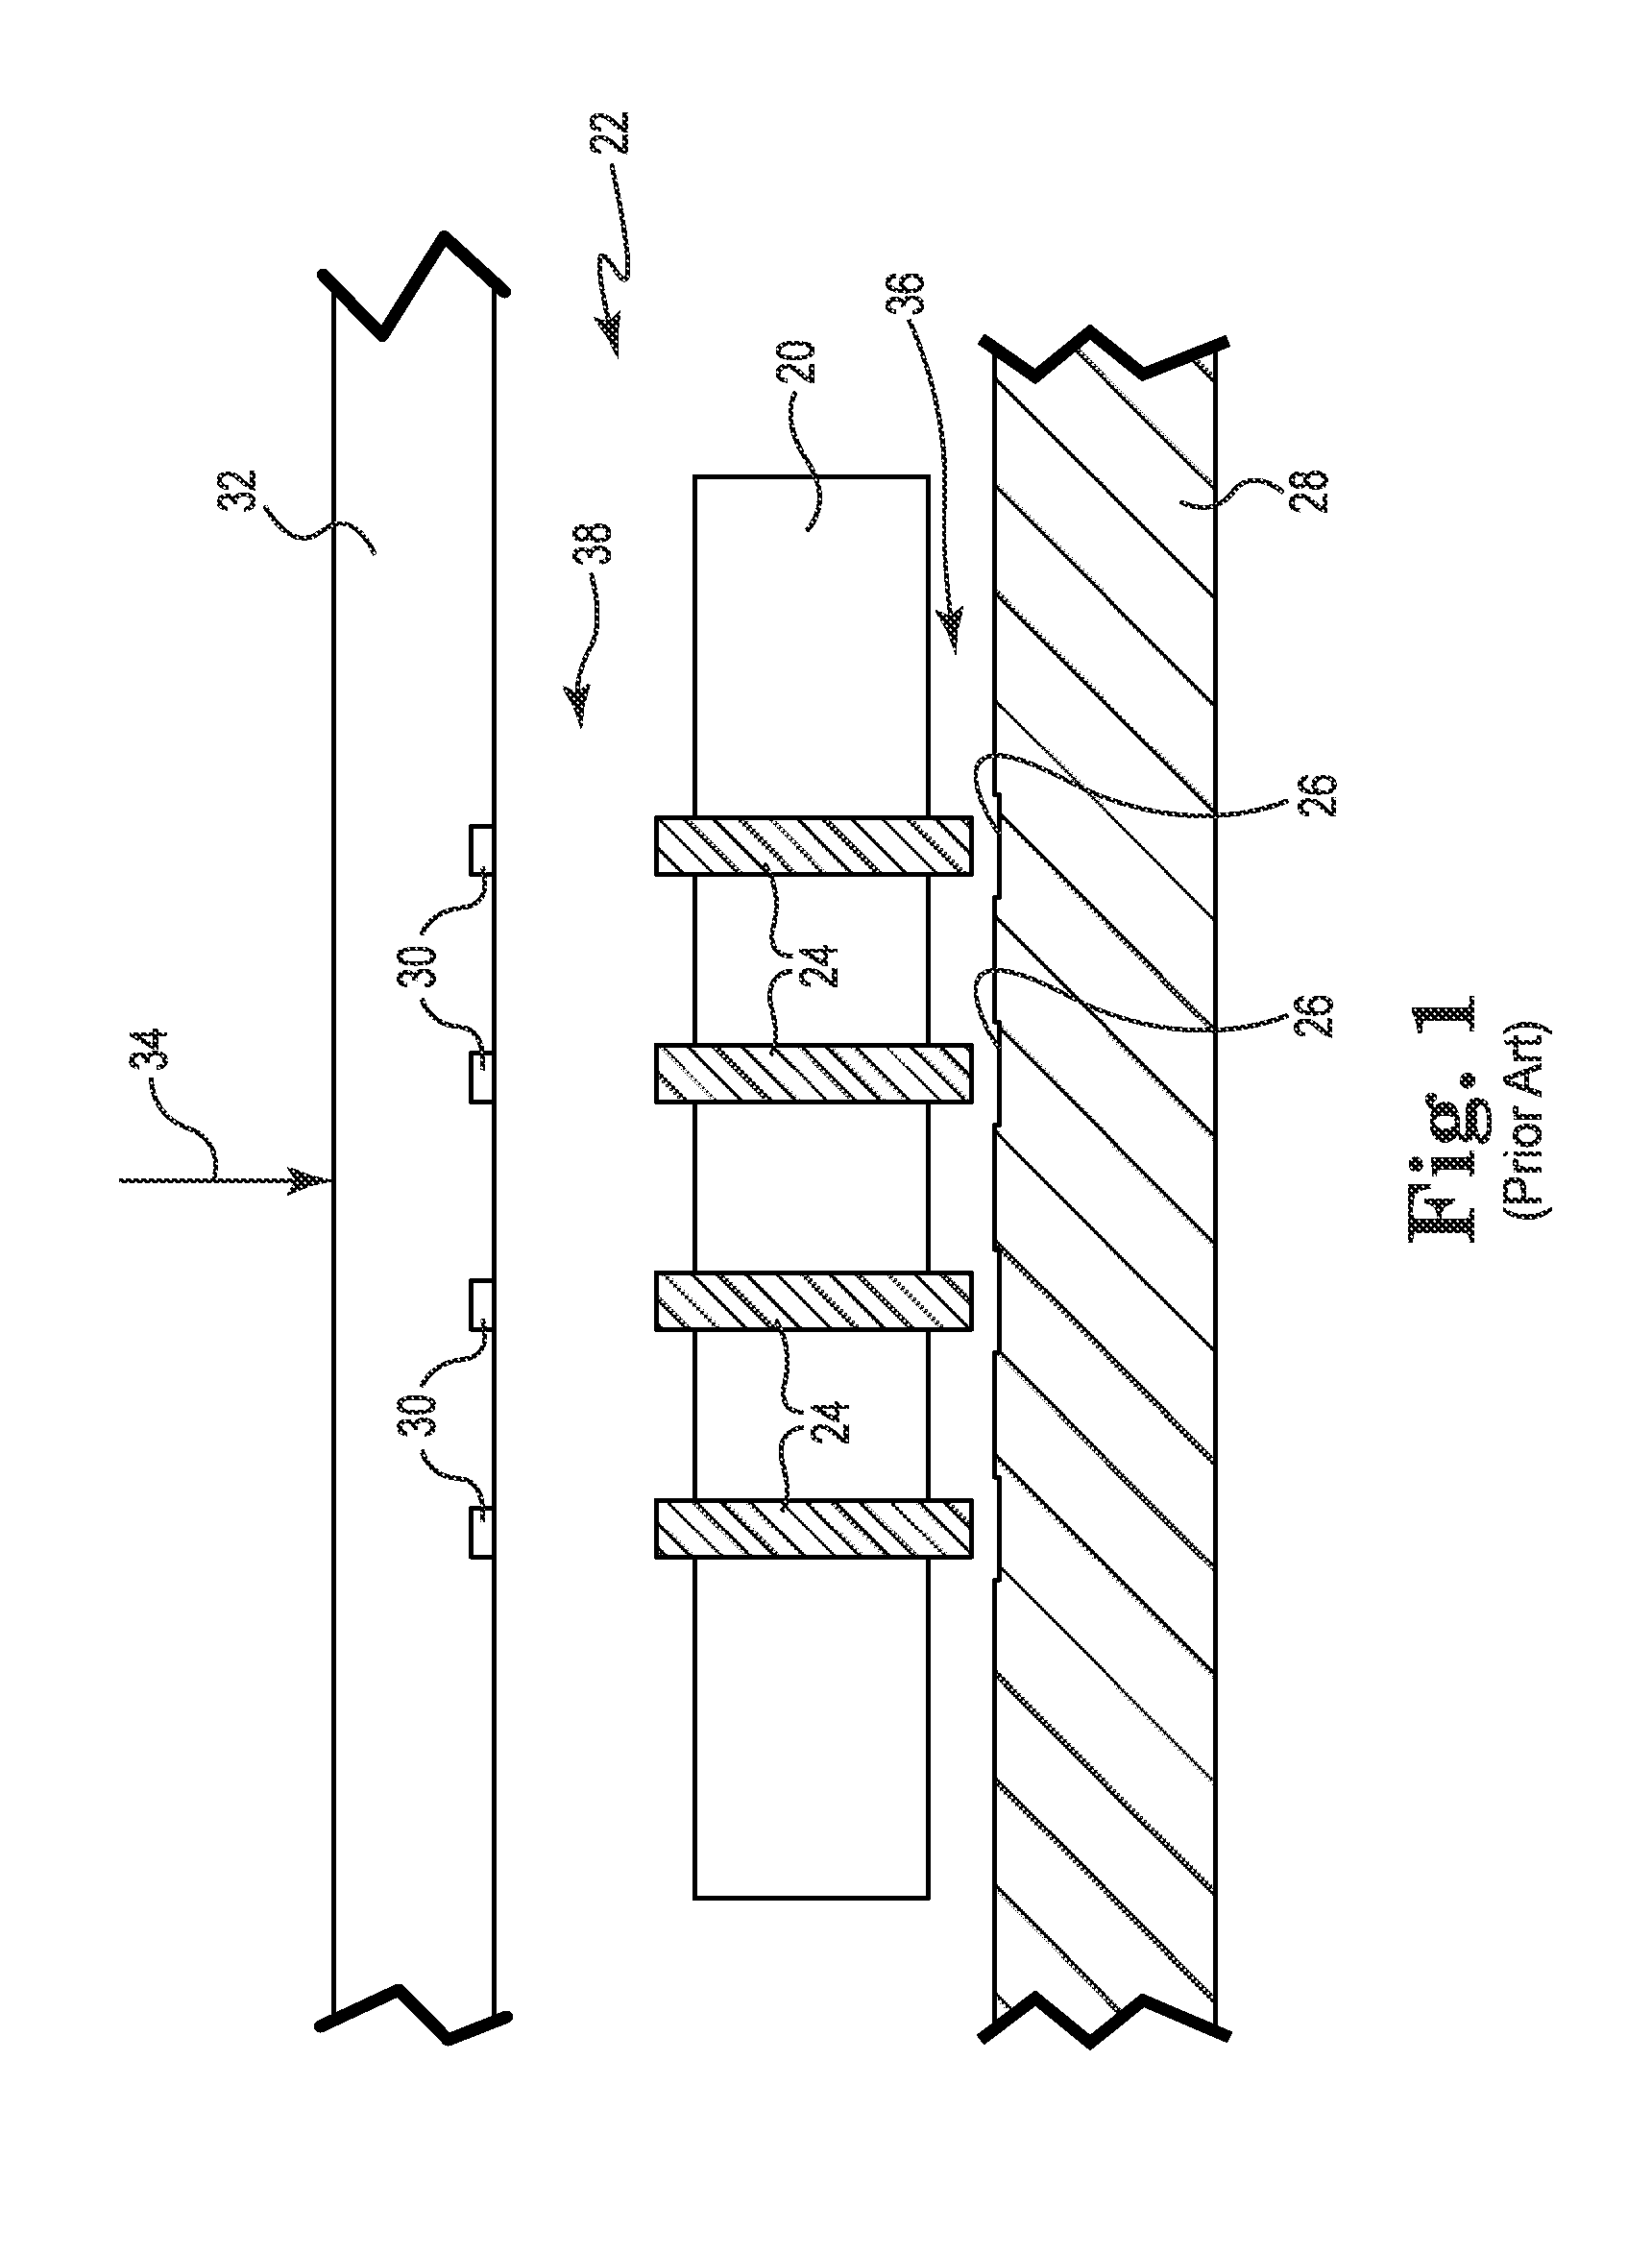 Compliant printed circuit wafer probe diagnostic tool